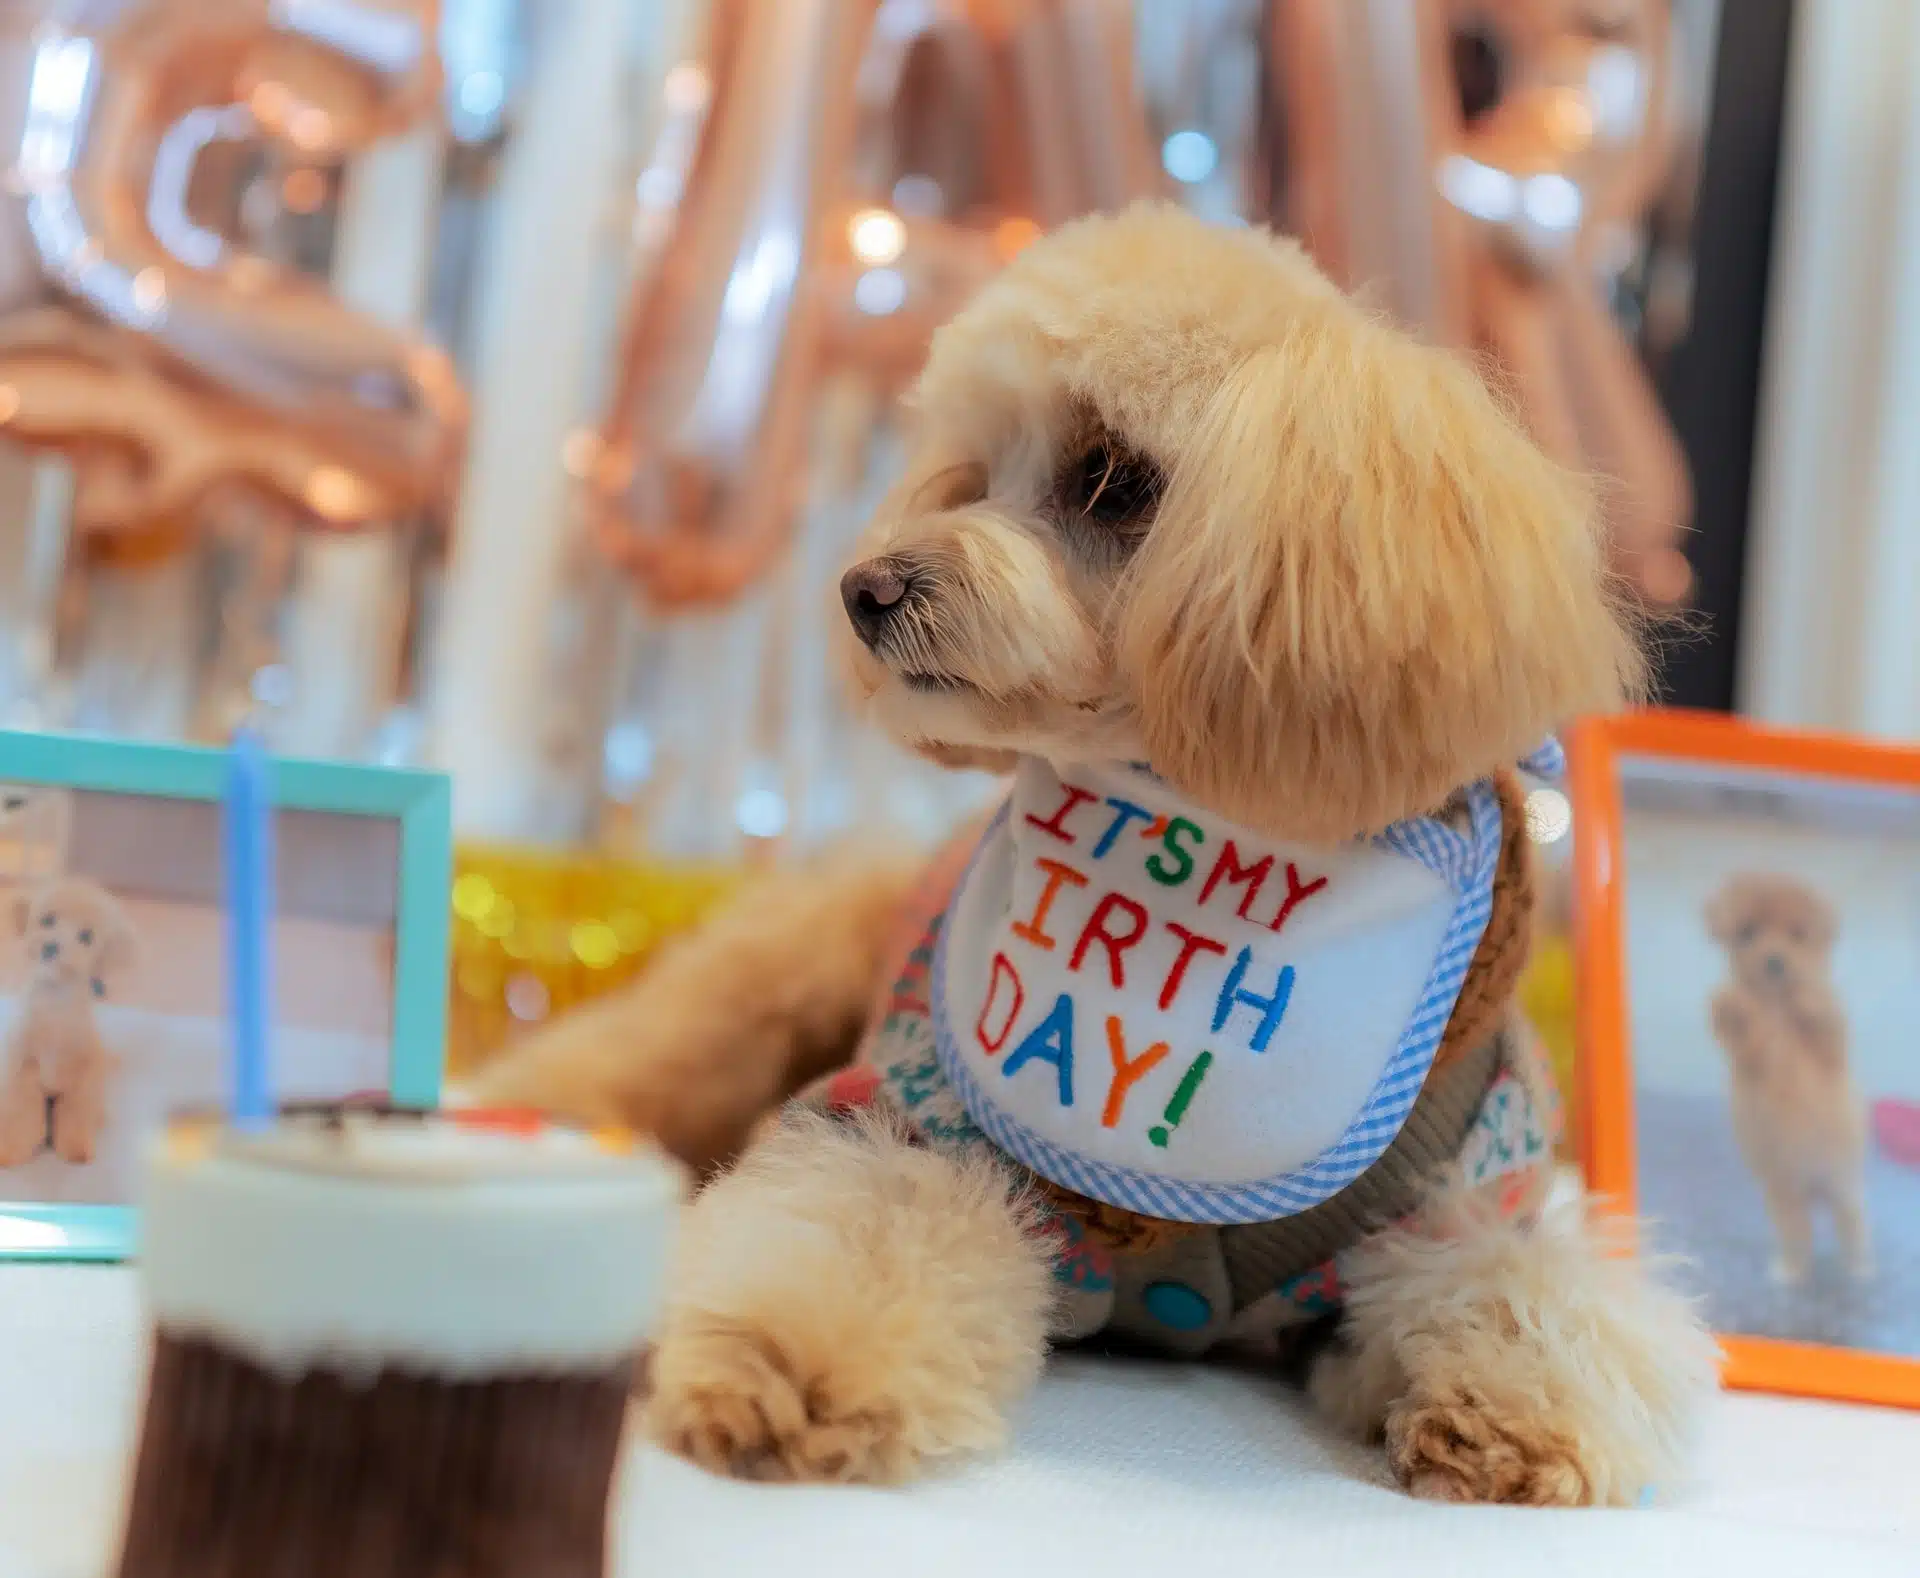 a dog celebrates its first birthday (its dog age in human years is therefore 15)